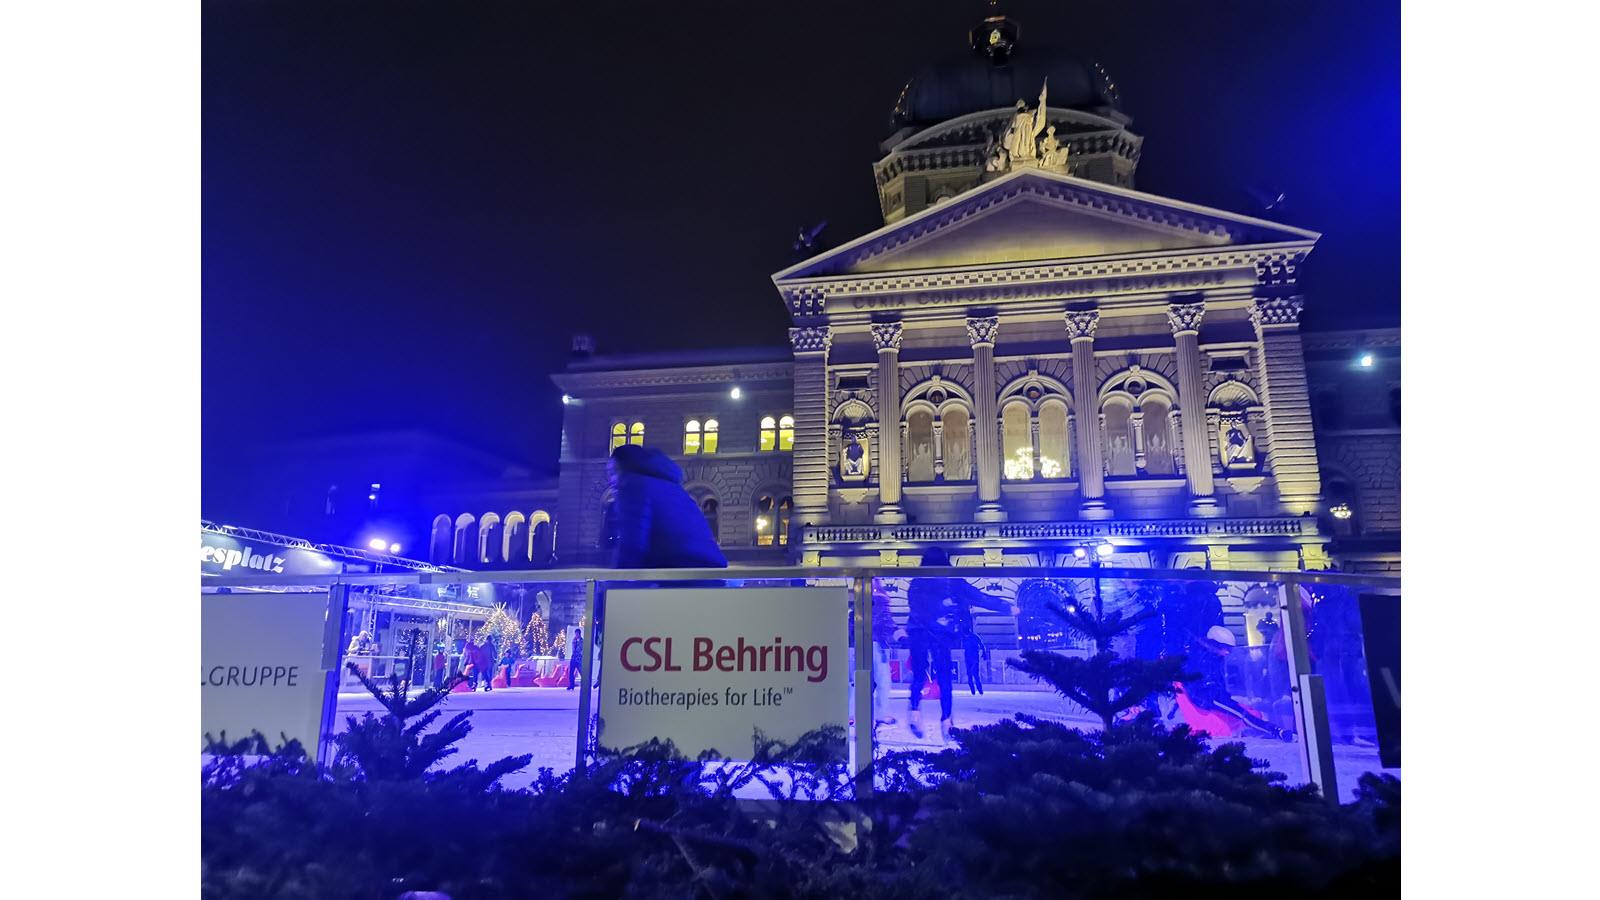 Pop-up skating rink outside of the Swiss Parliament building in Bern